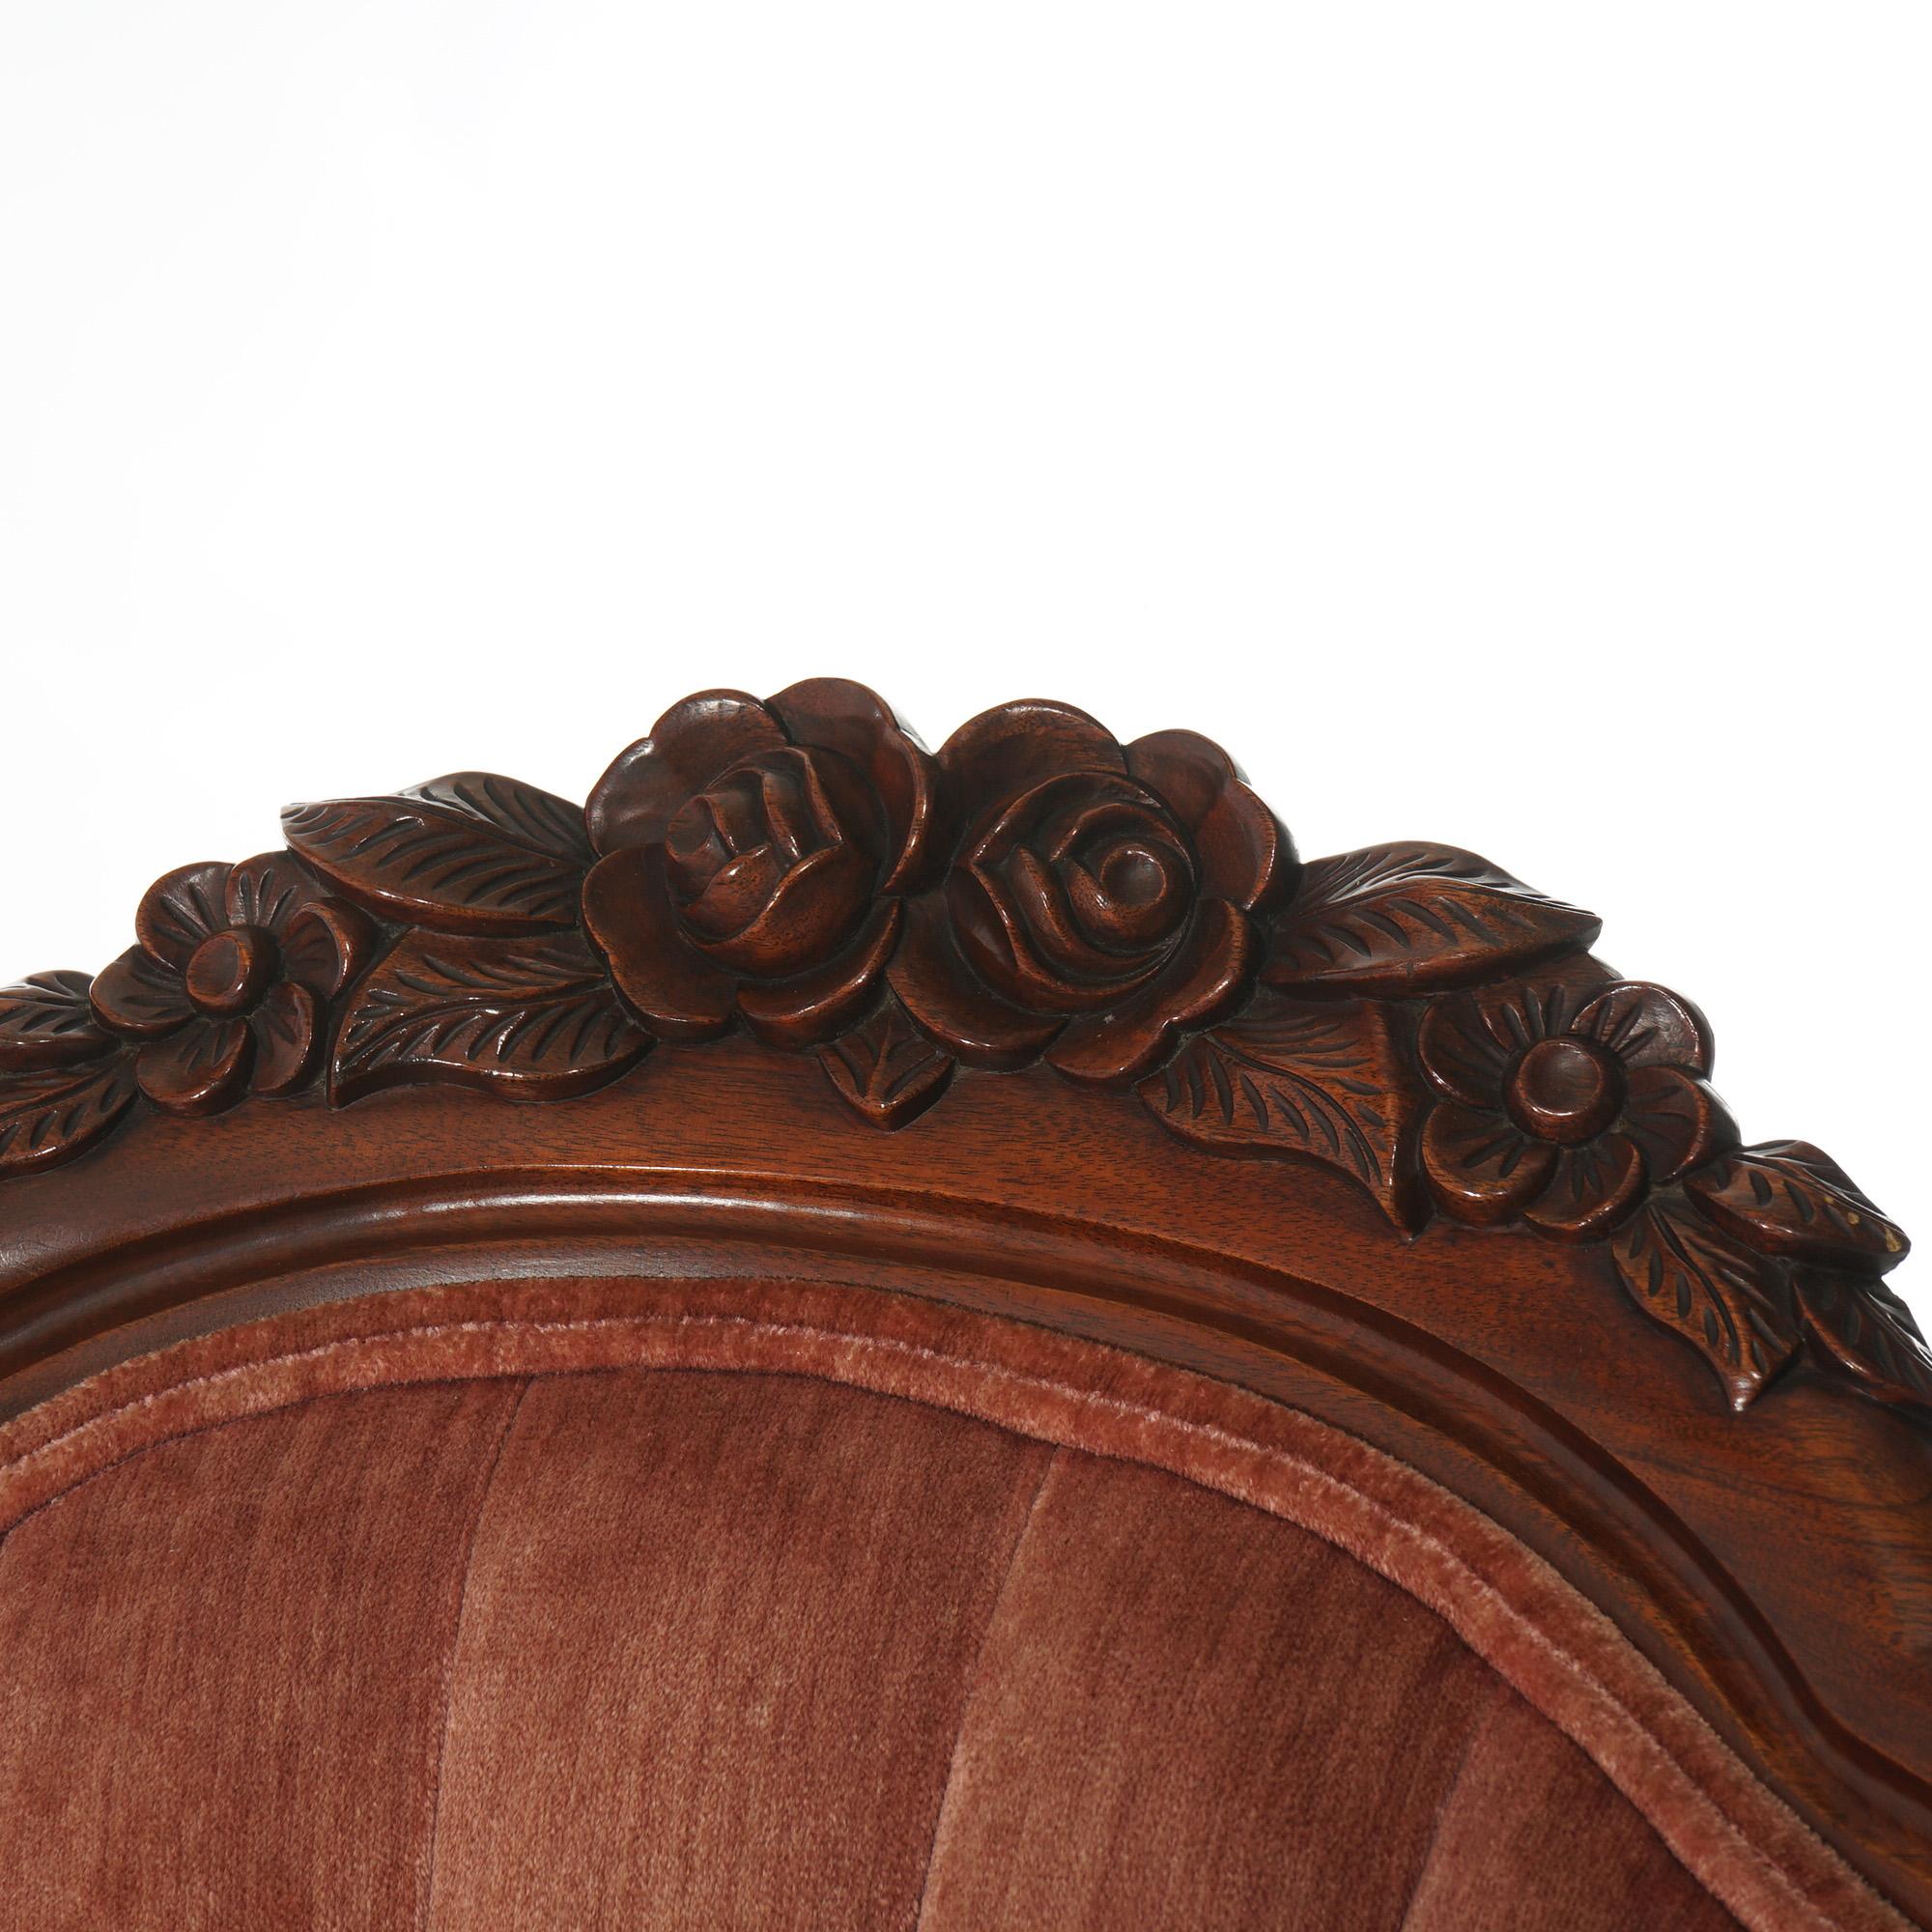 Antique Oversized Carved Walnut Armchair with Carved Floral Elements C1890 For Sale 4